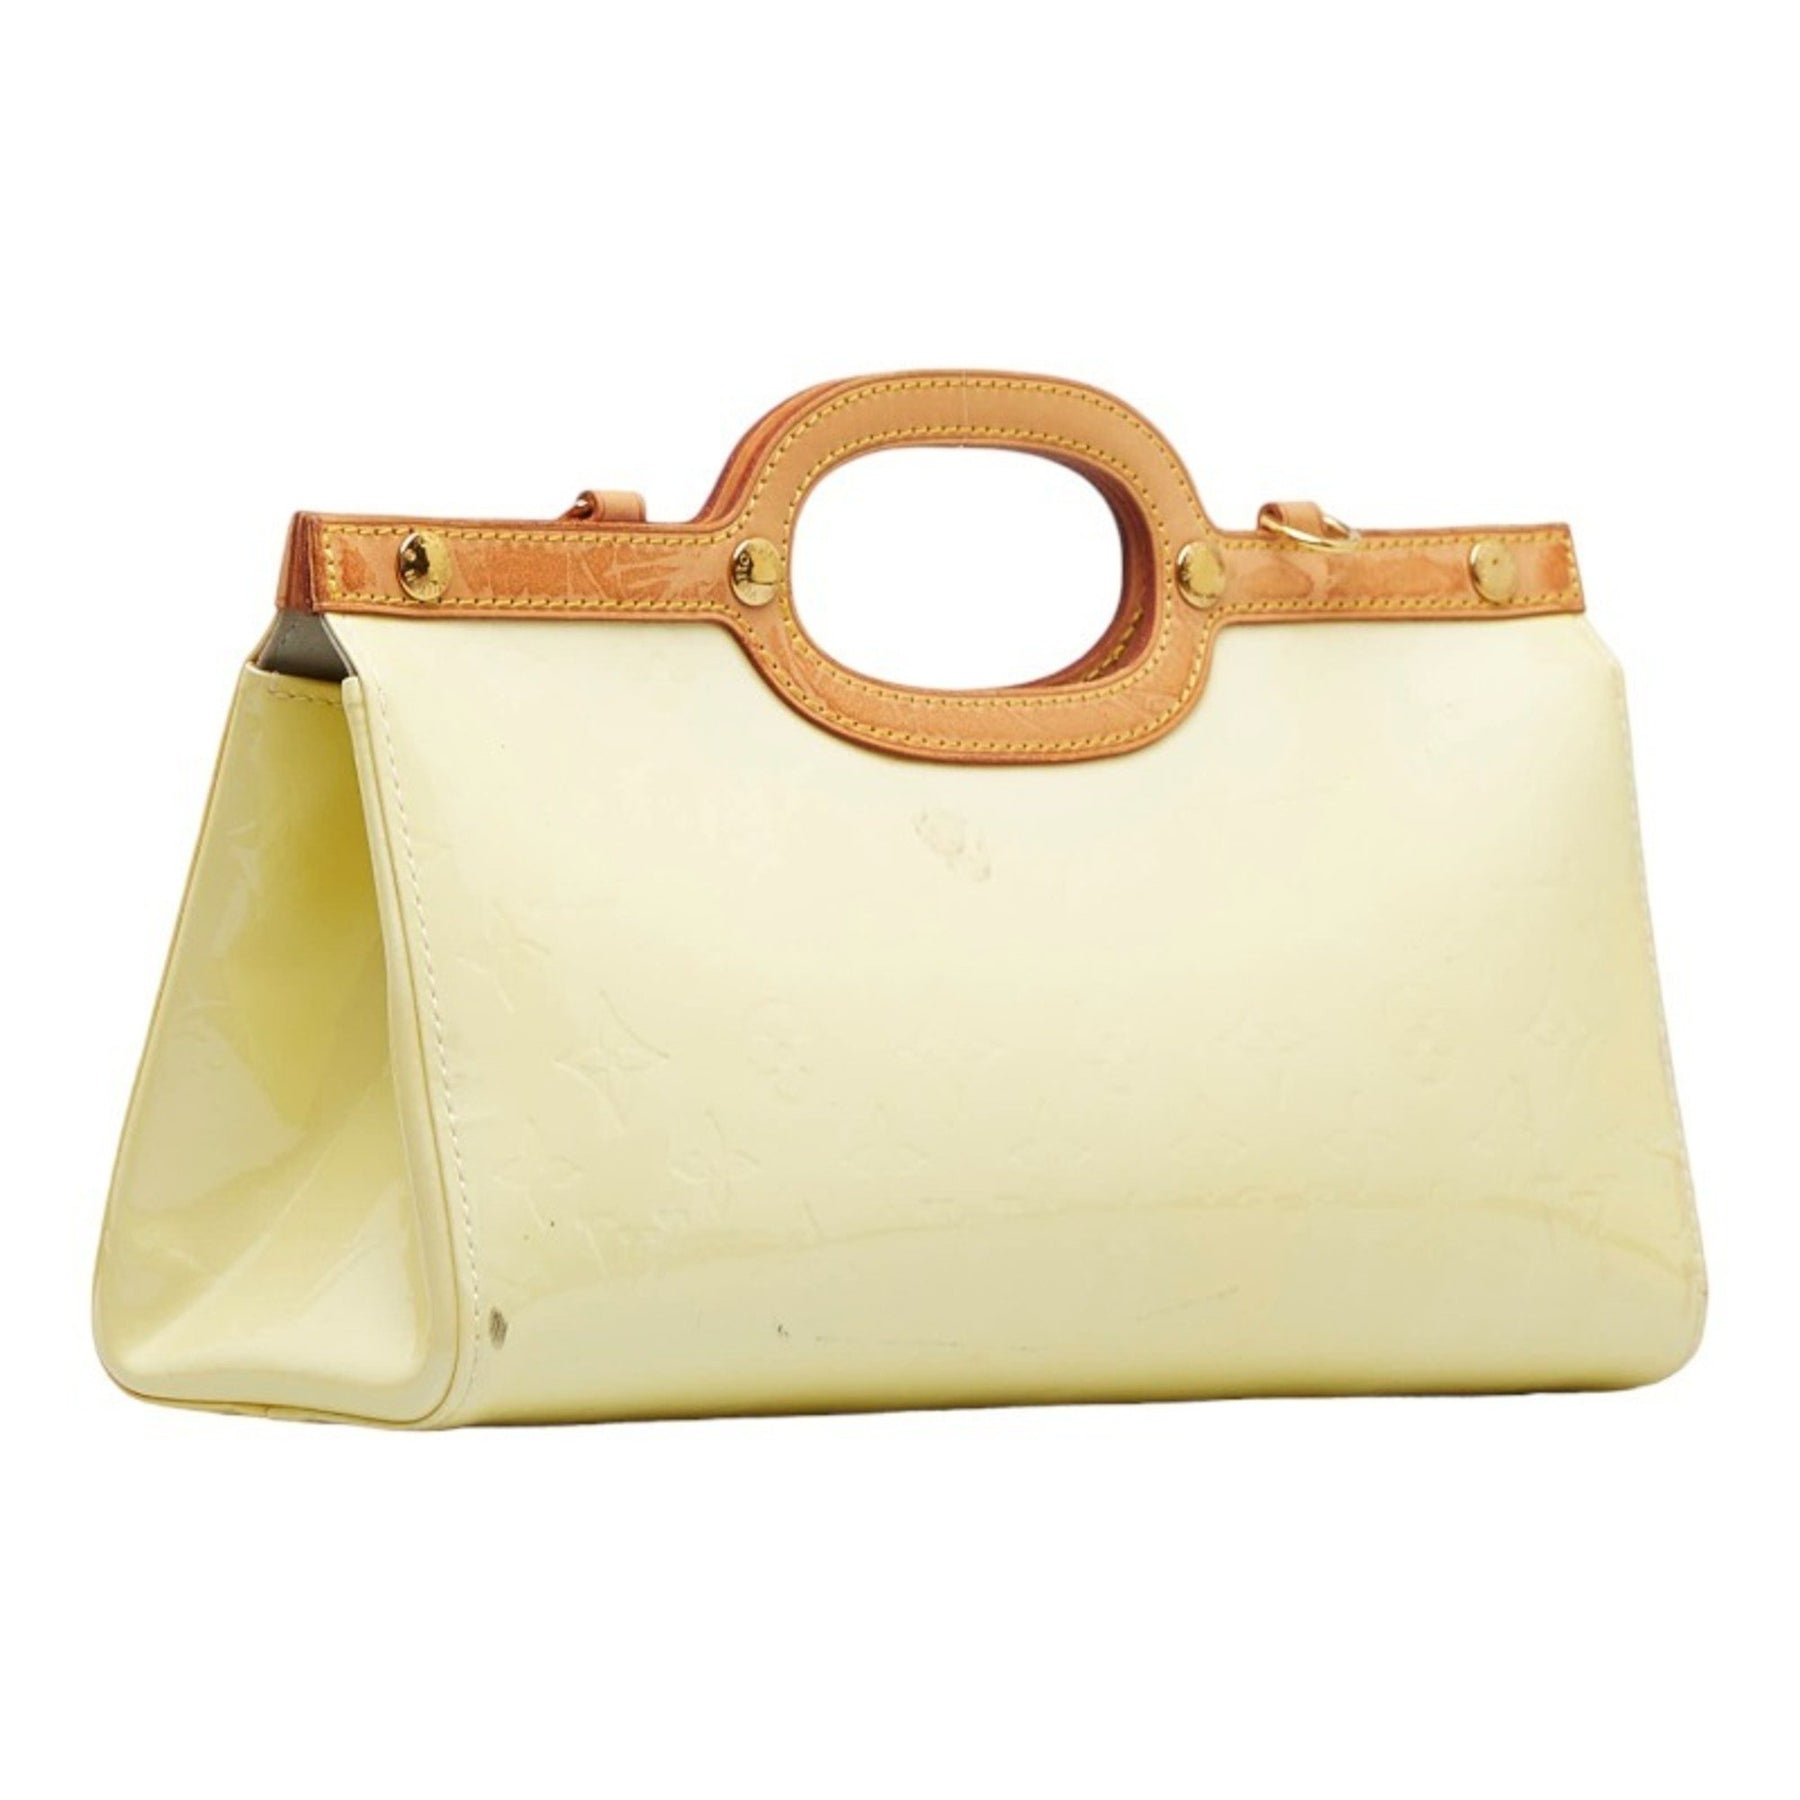 Brea MM Yellow Vernis Leather Shoulder Bag (Authentic Pre-Owned